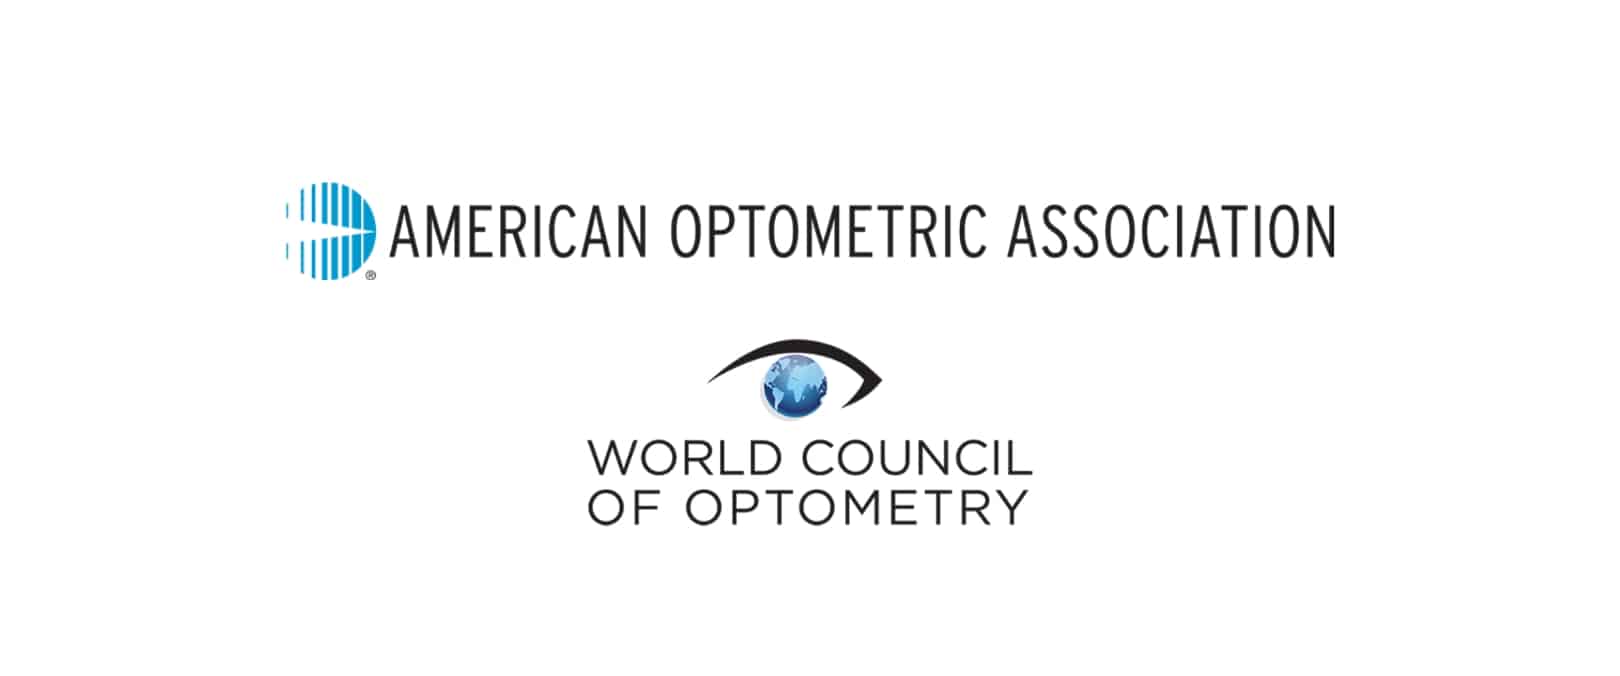 American Optometric Association and World Council of Optometry